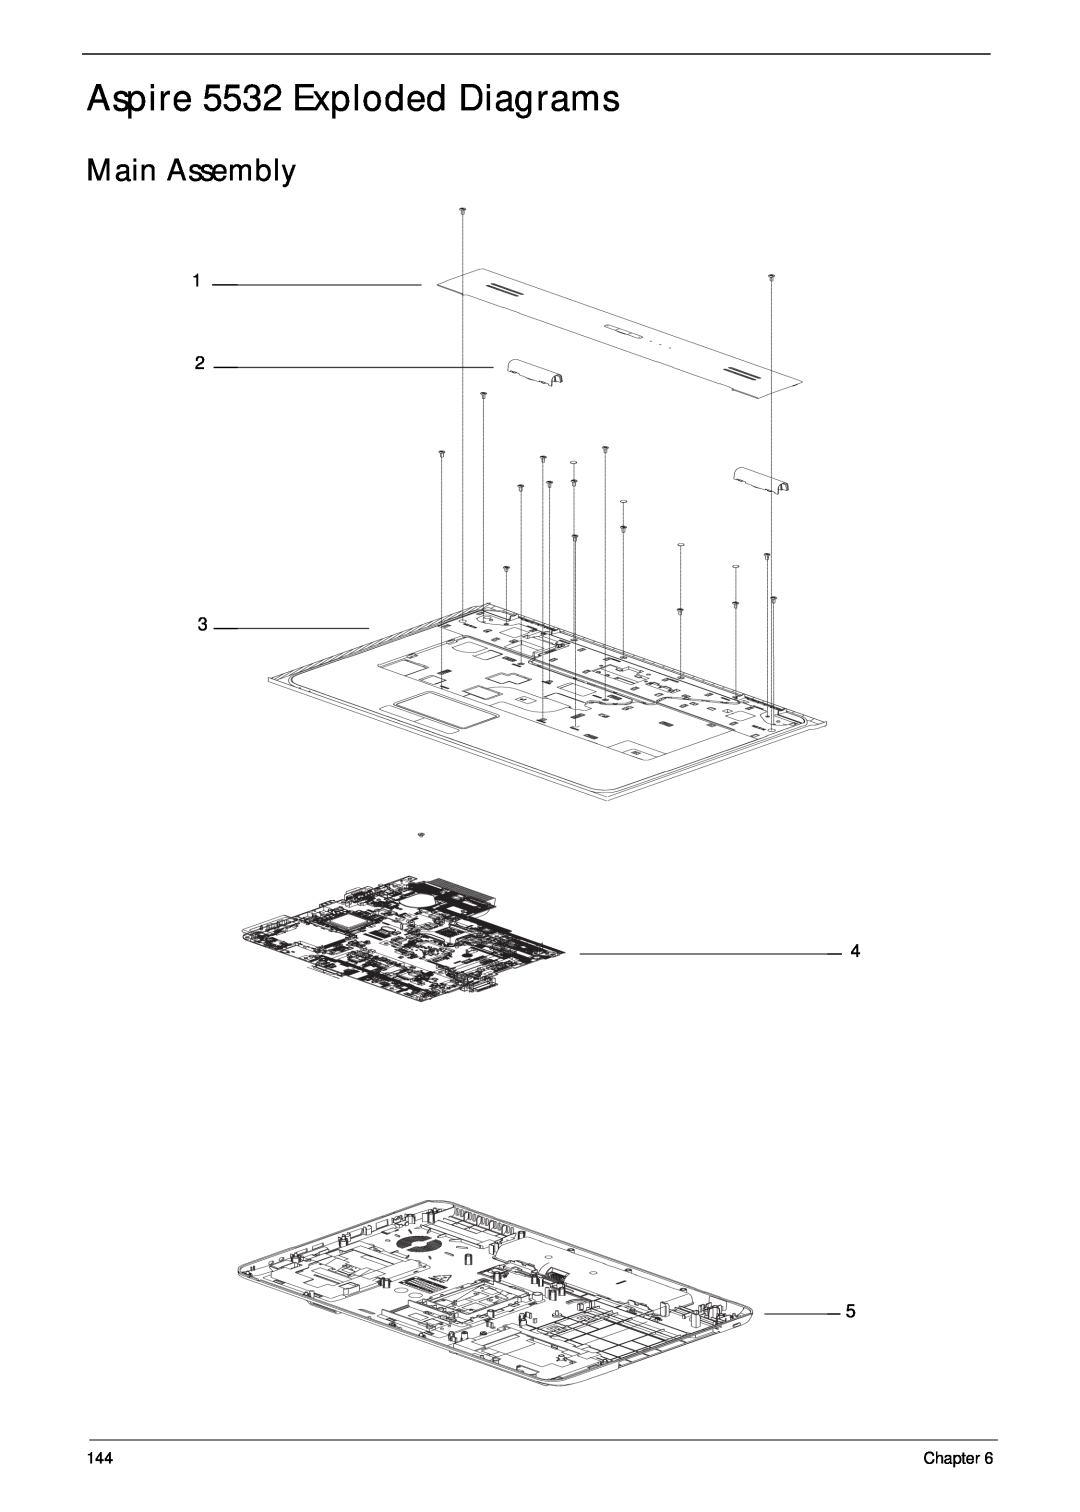 Acer manual Aspire 5532 Exploded Diagrams, Main Assembly, Chapter 